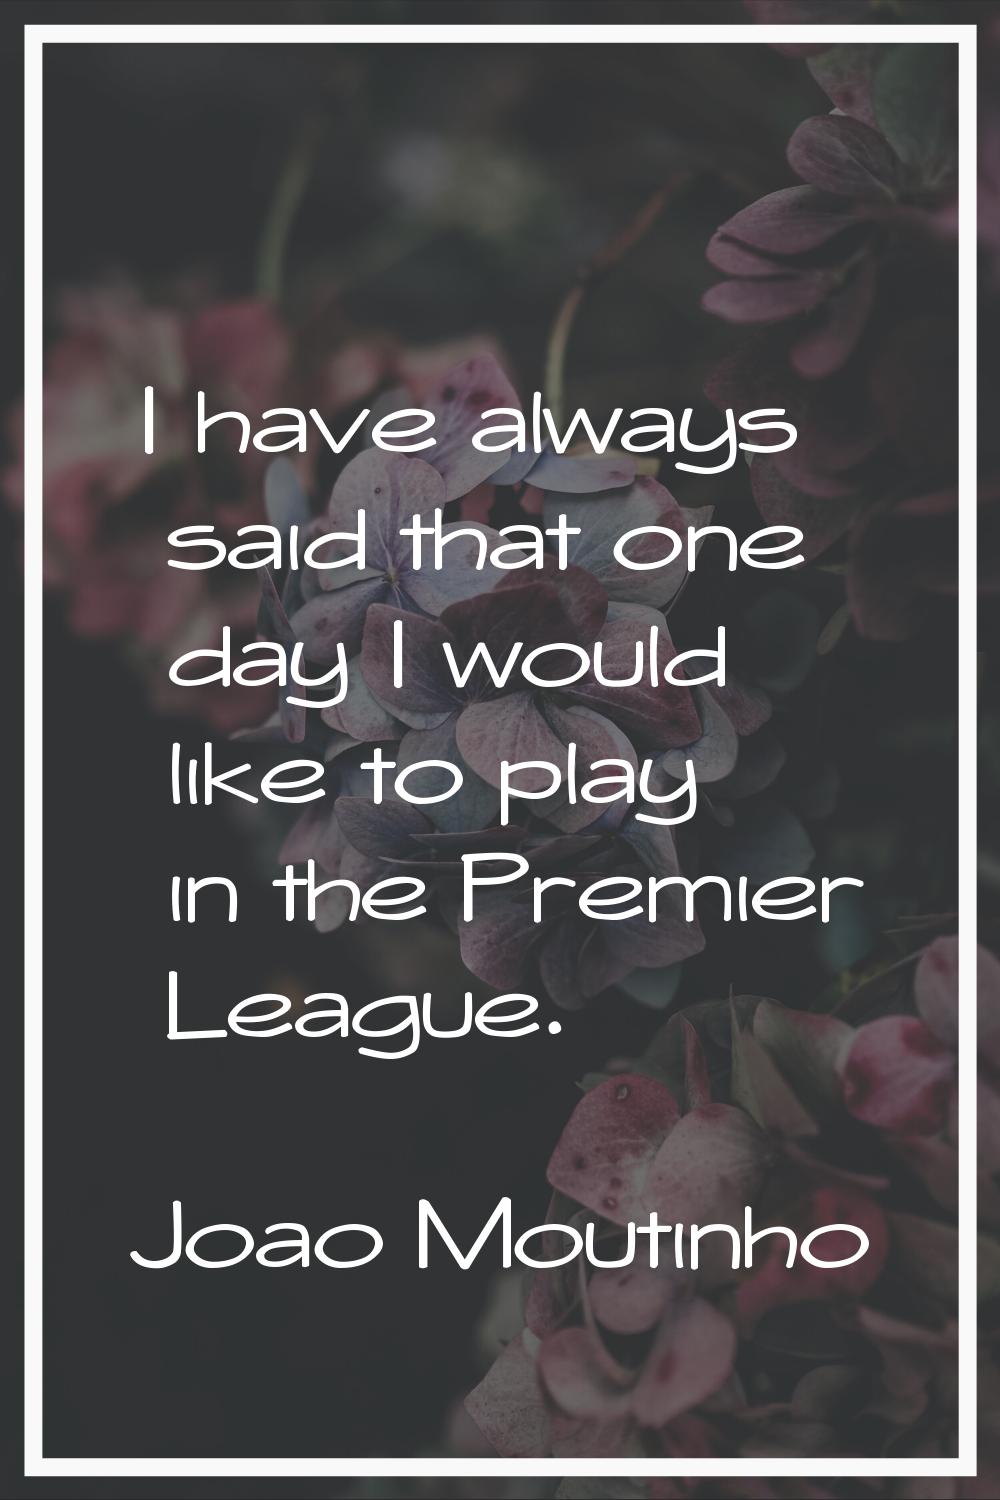 I have always said that one day I would like to play in the Premier League.